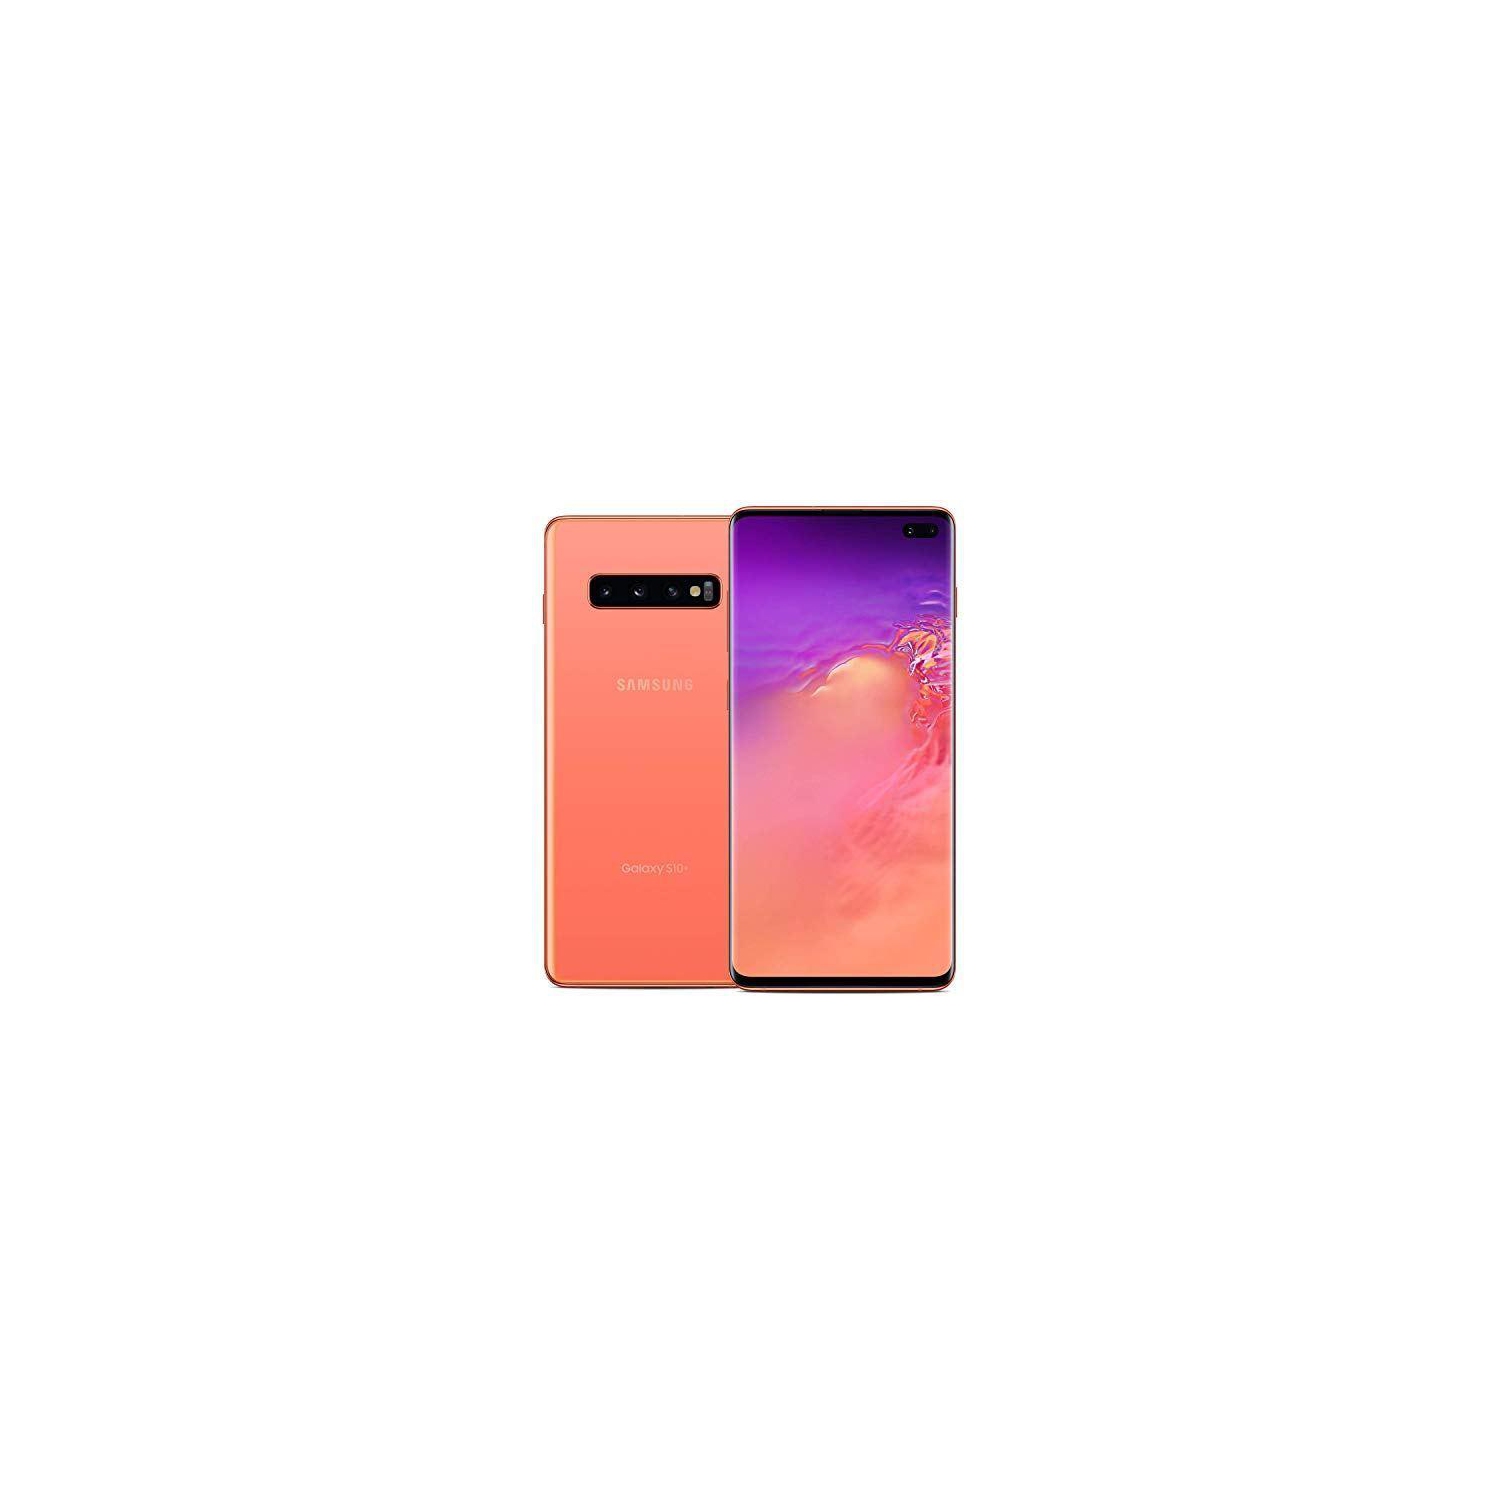 Samsung Galaxy S10 Plus 128GB Smartphone - Flamingo Pink - Unlocked - Certified Pre-Owned